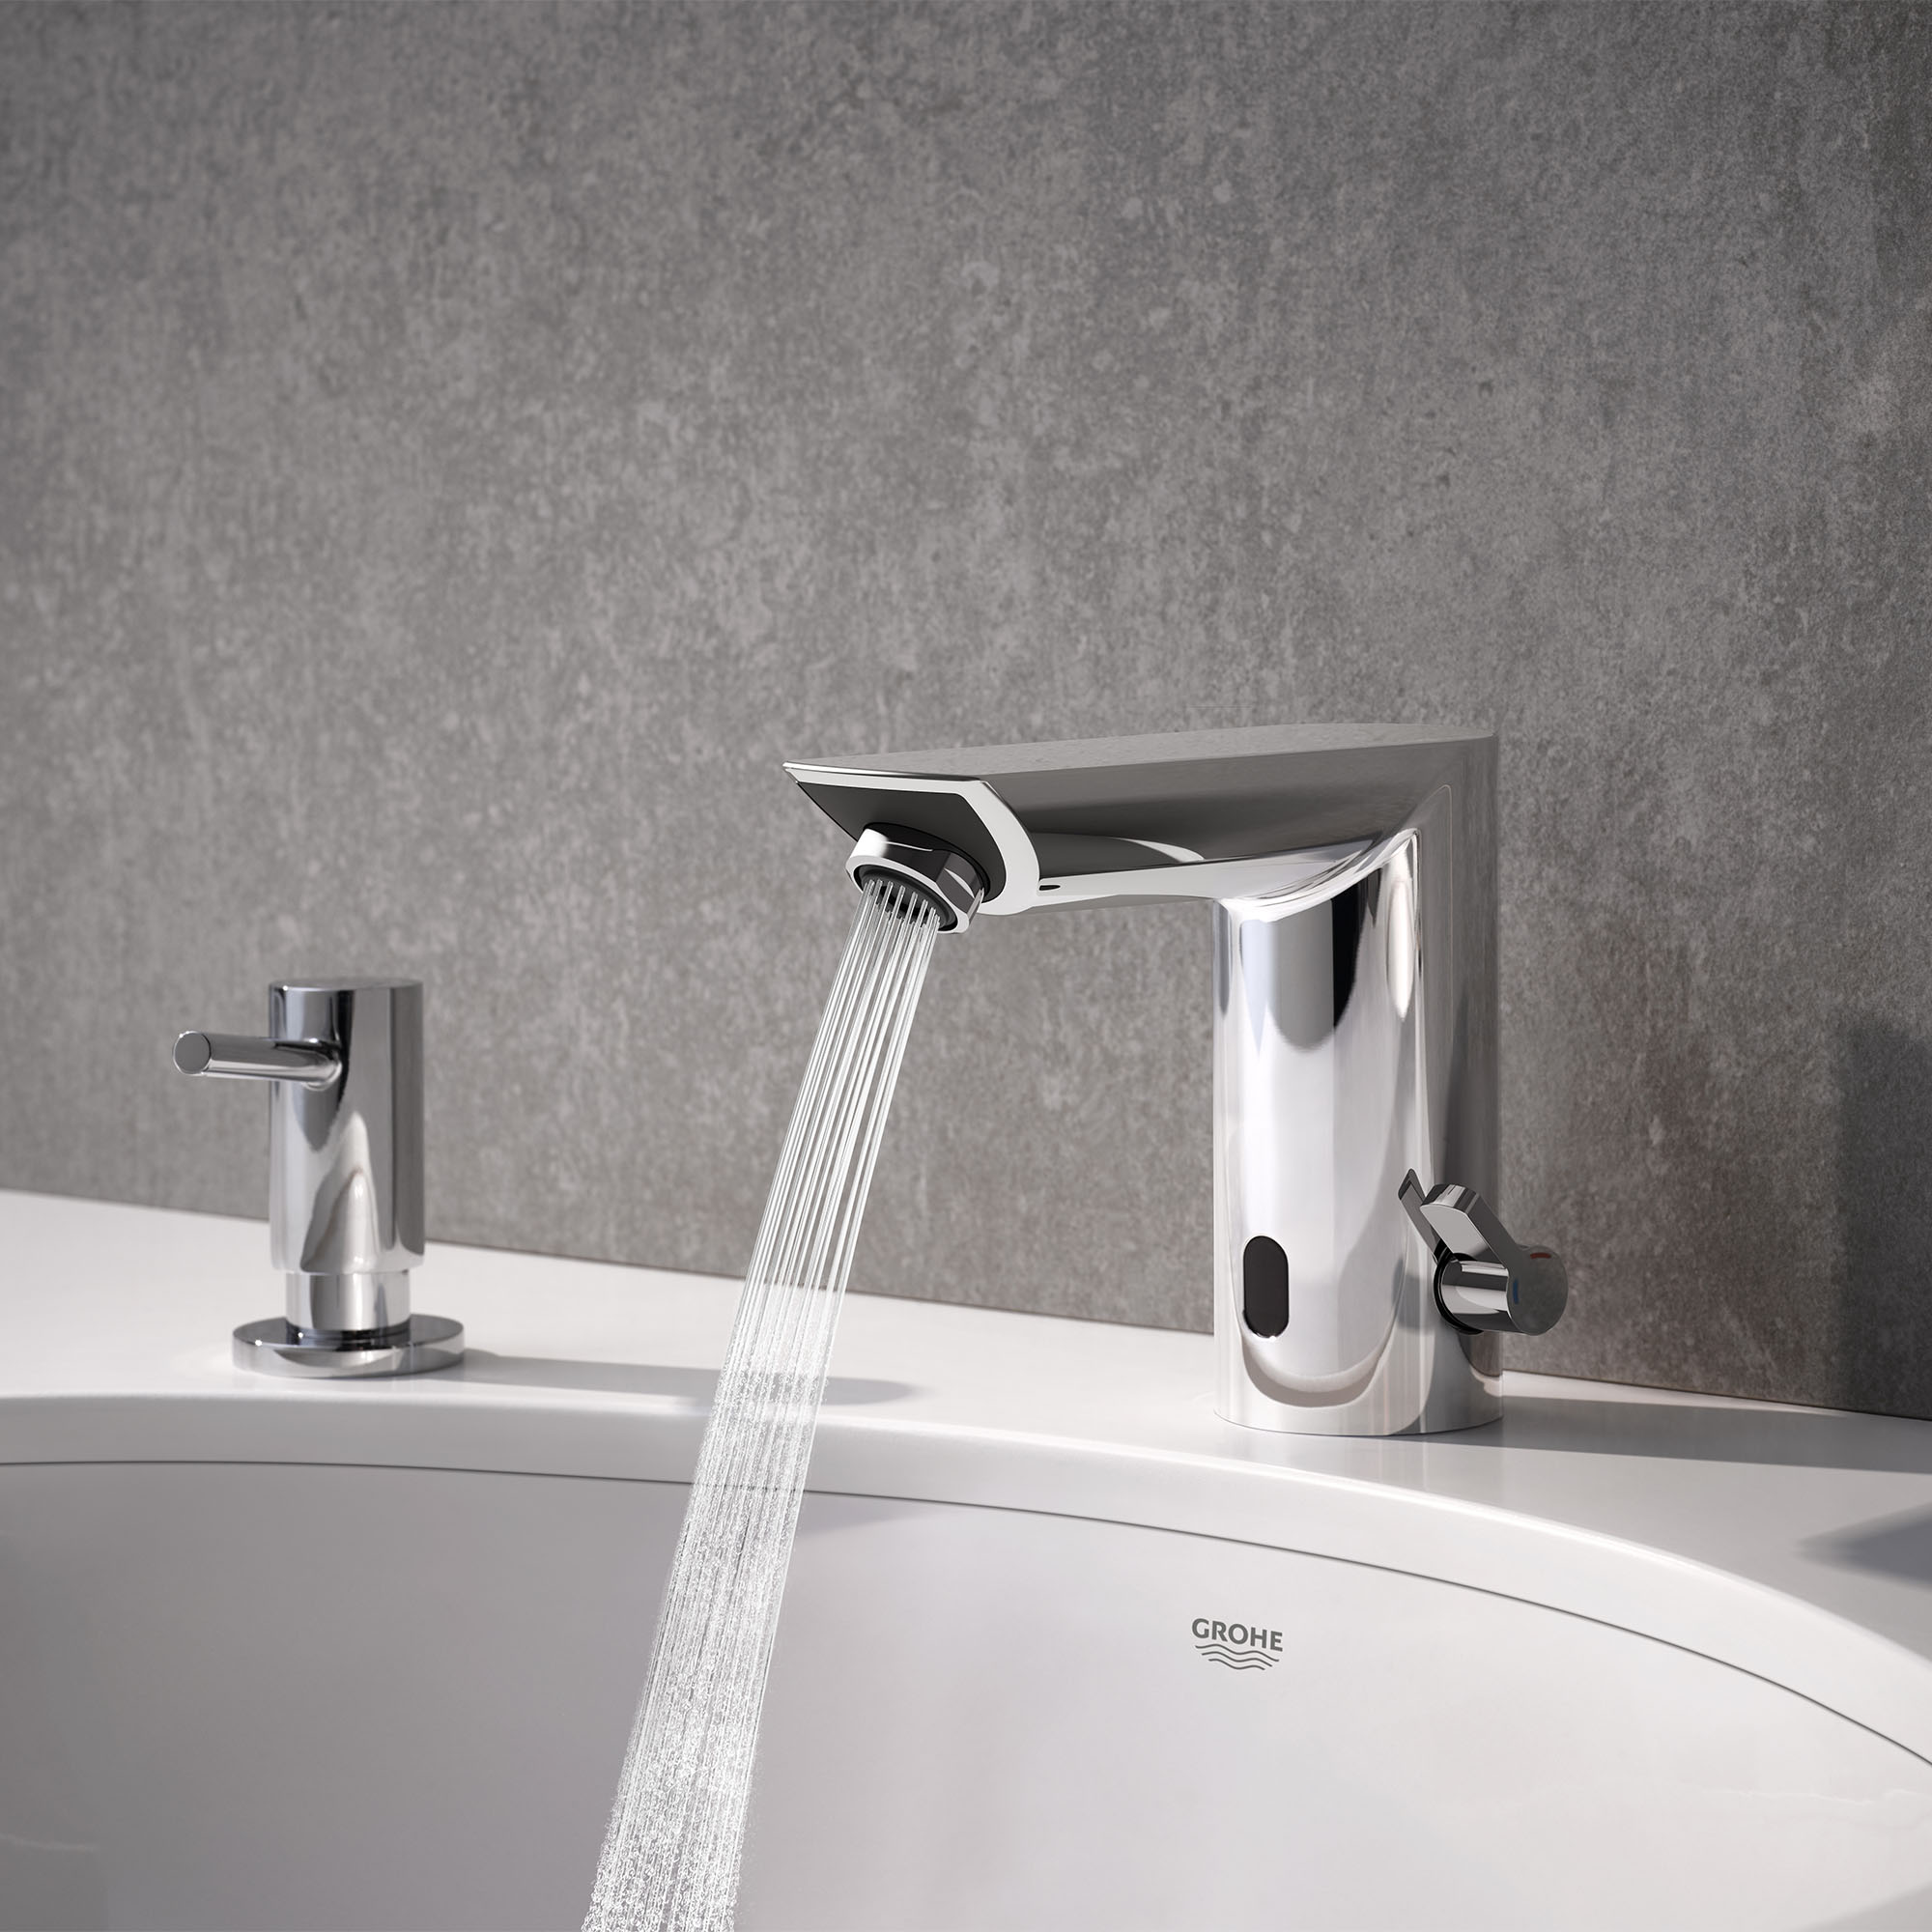 E Touchless Electronic Faucet with Temperature Control Lever, Battery-Powered